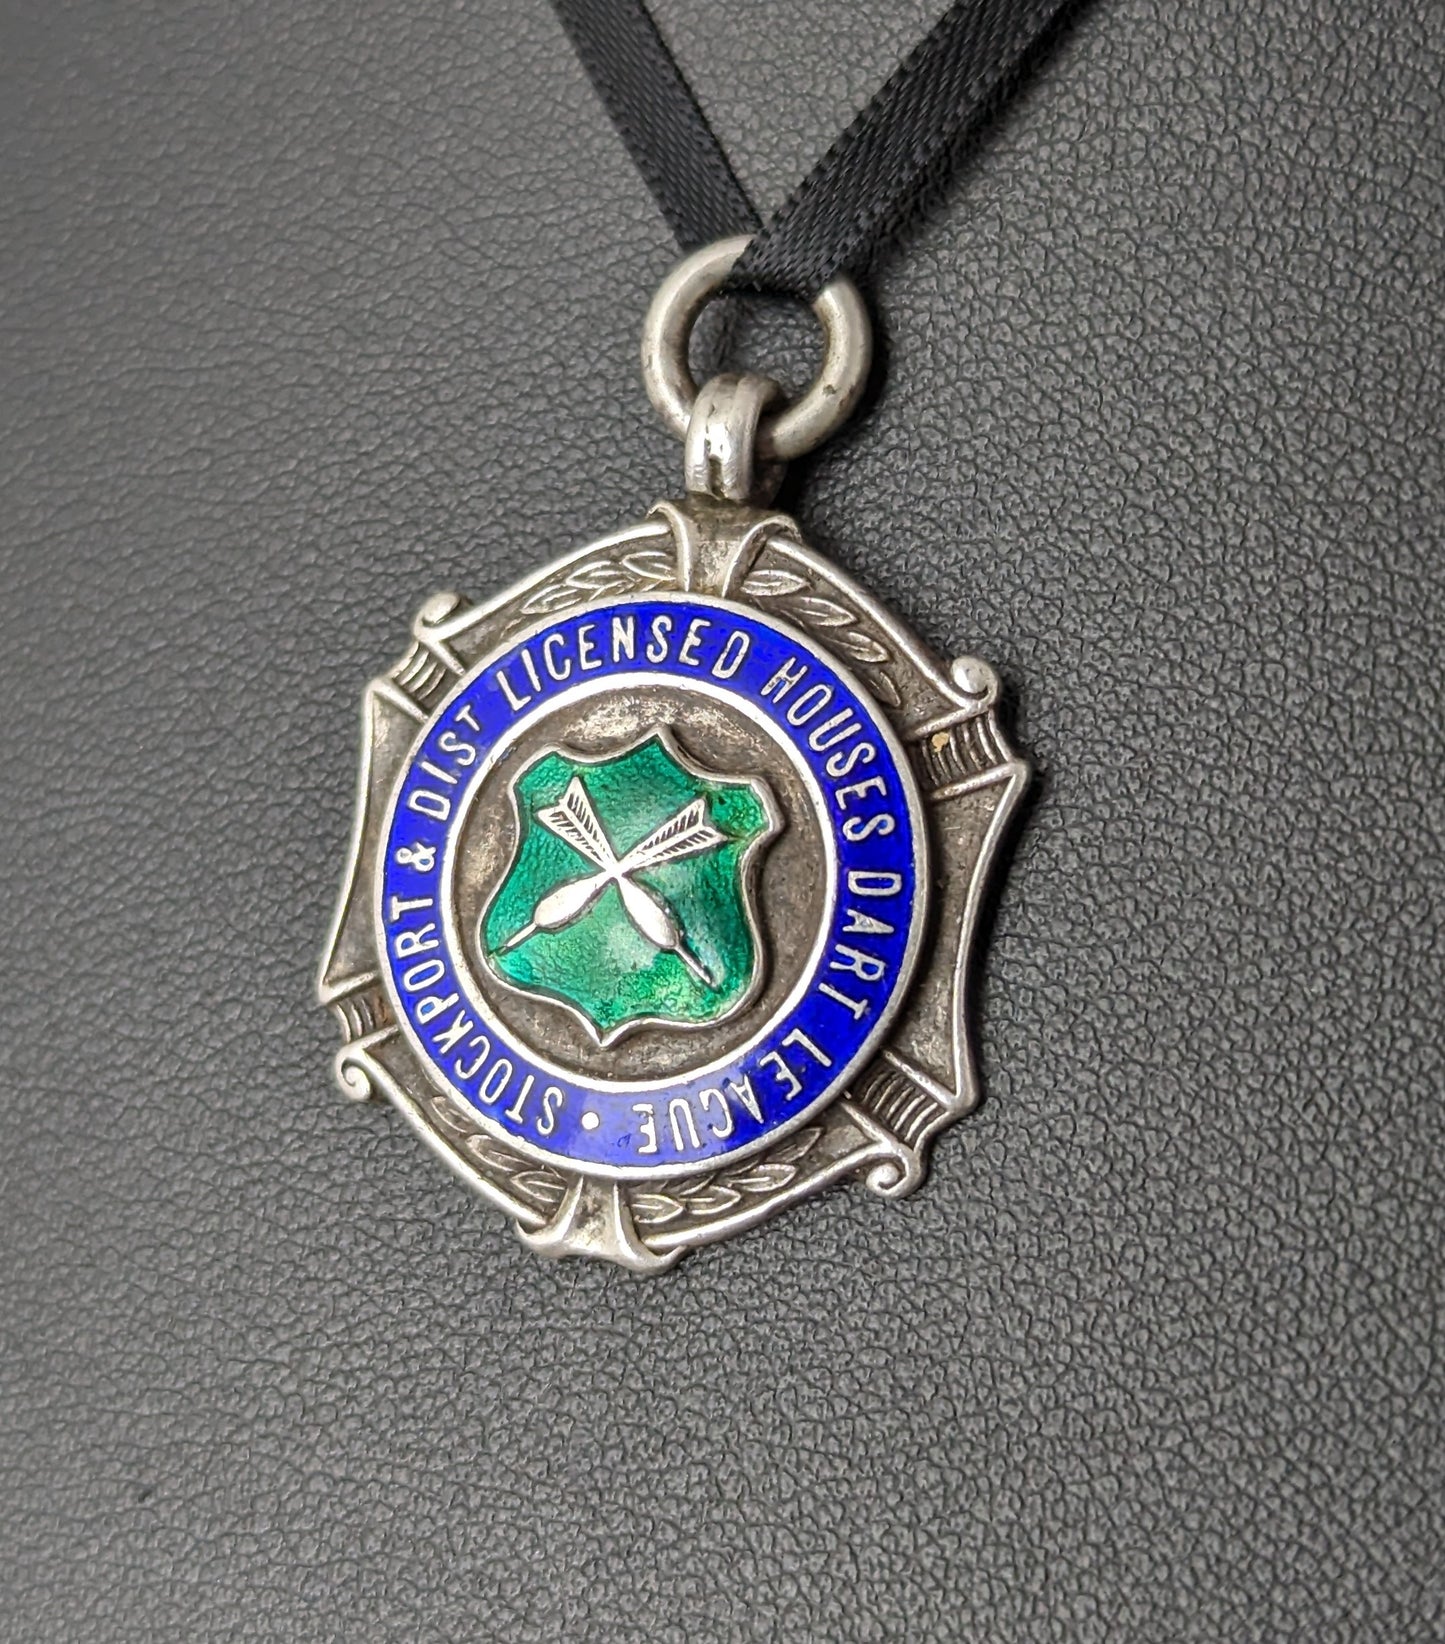 Vintage sterling silver and enamel fob pendant, Darts league